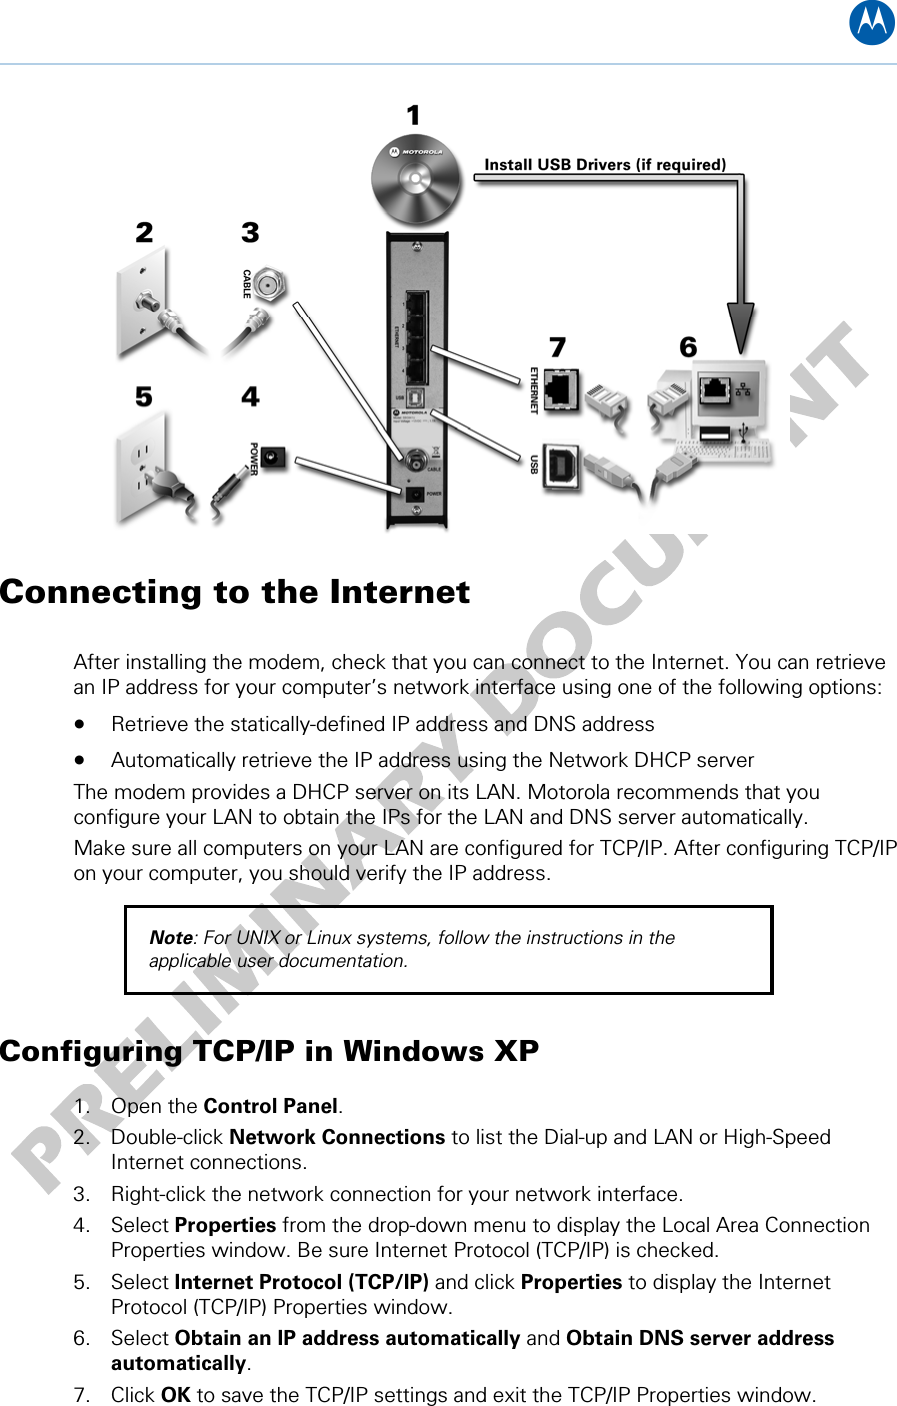 B  Connecting to the Internet  After installing the modem, check that you can connect to the Internet. You can retrieve an IP address for your computer’s network interface using one of the following options: • Retrieve the statically-defined IP address and DNS address • Automatically retrieve the IP address using the Network DHCP server The modem provides a DHCP server on its LAN. Motorola recommends that you configure your LAN to obtain the IPs for the LAN and DNS server automatically. Make sure all computers on your LAN are configured for TCP/IP. After configuring TCP/IP on your computer, you should verify the IP address. Note: For UNIX or Linux systems, follow the instructions in the applicable user documentation. Configuring TCP/IP in Windows XP 1. Open the Control Panel. 2. Double-click Network Connections to list the Dial-up and LAN or High-Speed Internet connections. 3. Right-click the network connection for your network interface. 4. Select Properties from the drop-down menu to display the Local Area Connection Properties window. Be sure Internet Protocol (TCP/IP) is checked. 5. Select Internet Protocol (TCP/IP) and click Properties to display the Internet Protocol (TCP/IP) Properties window. 6. Select Obtain an IP address automatically and Obtain DNS server address automatically. 7. Click OK to save the TCP/IP settings and exit the TCP/IP Properties window. 3 • Installing the Modem 12   